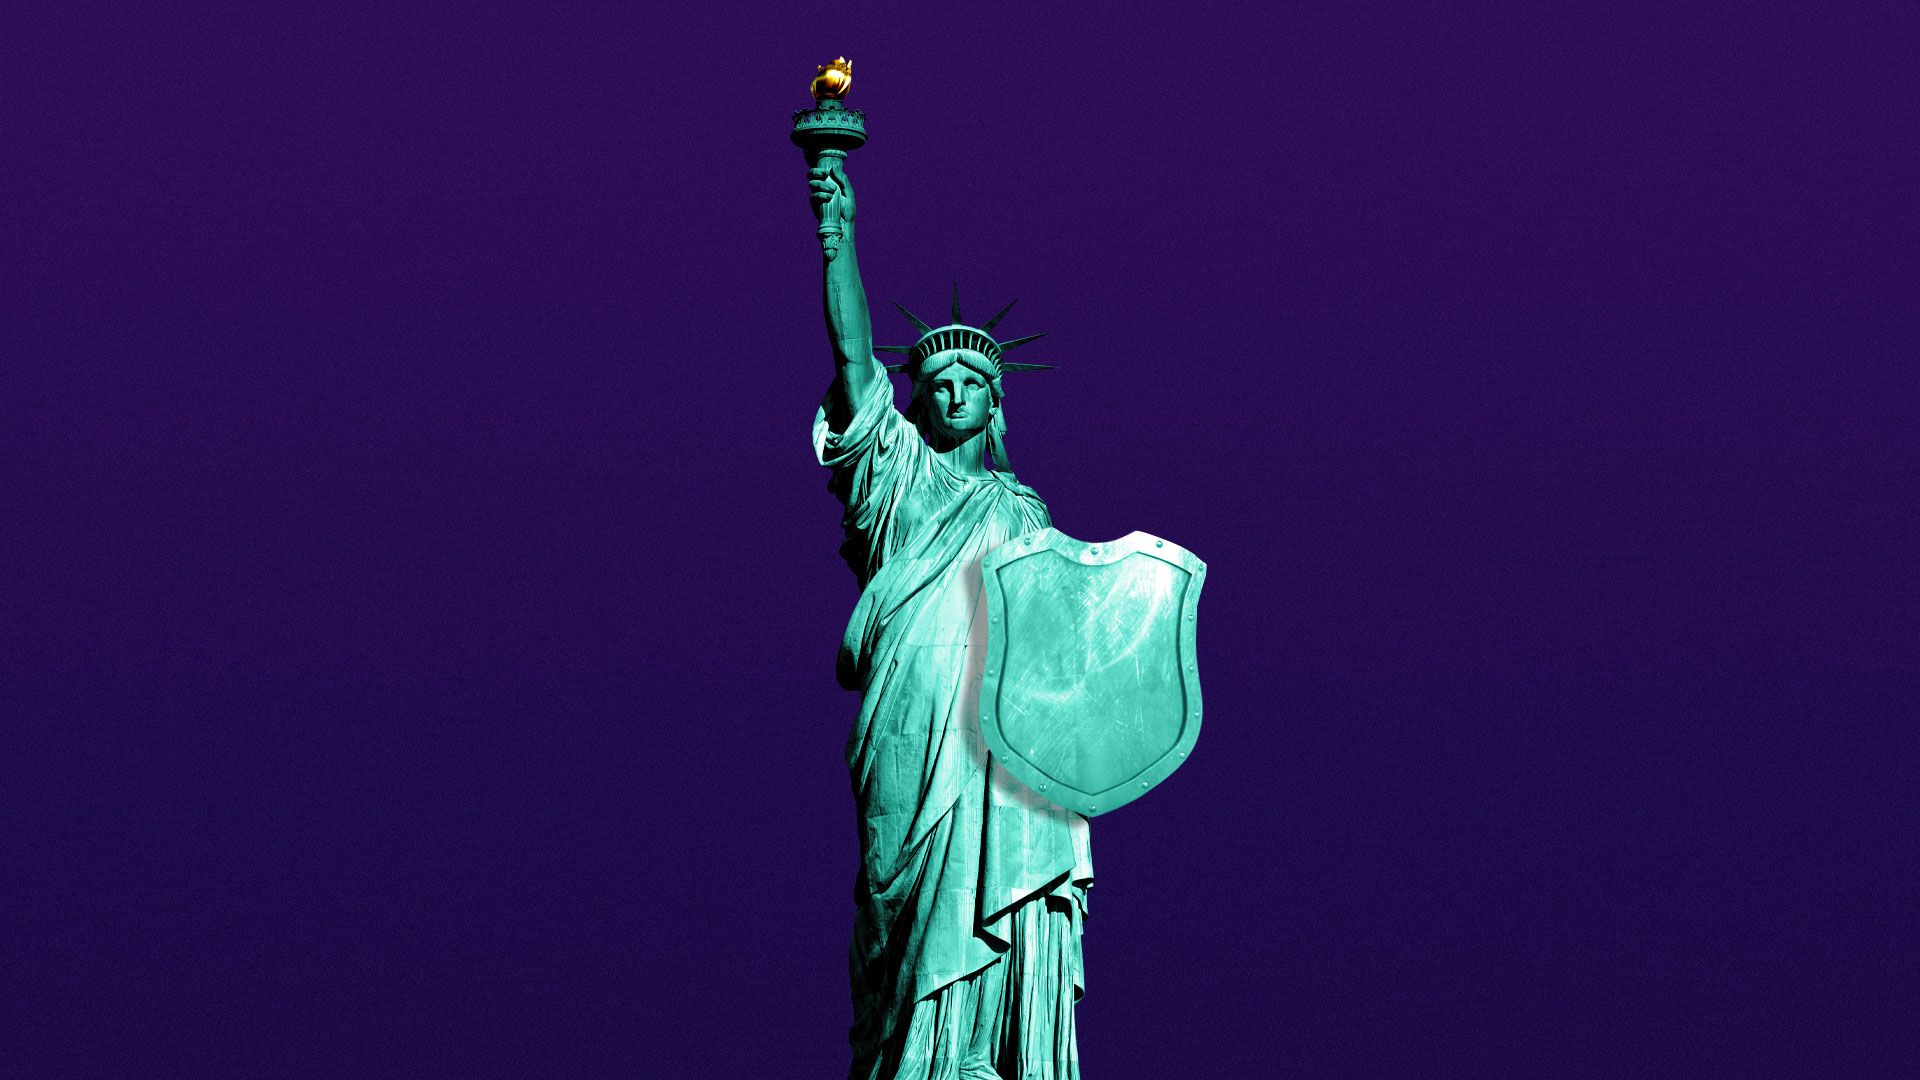 Illustration of Statue of Liberty holding a shield.